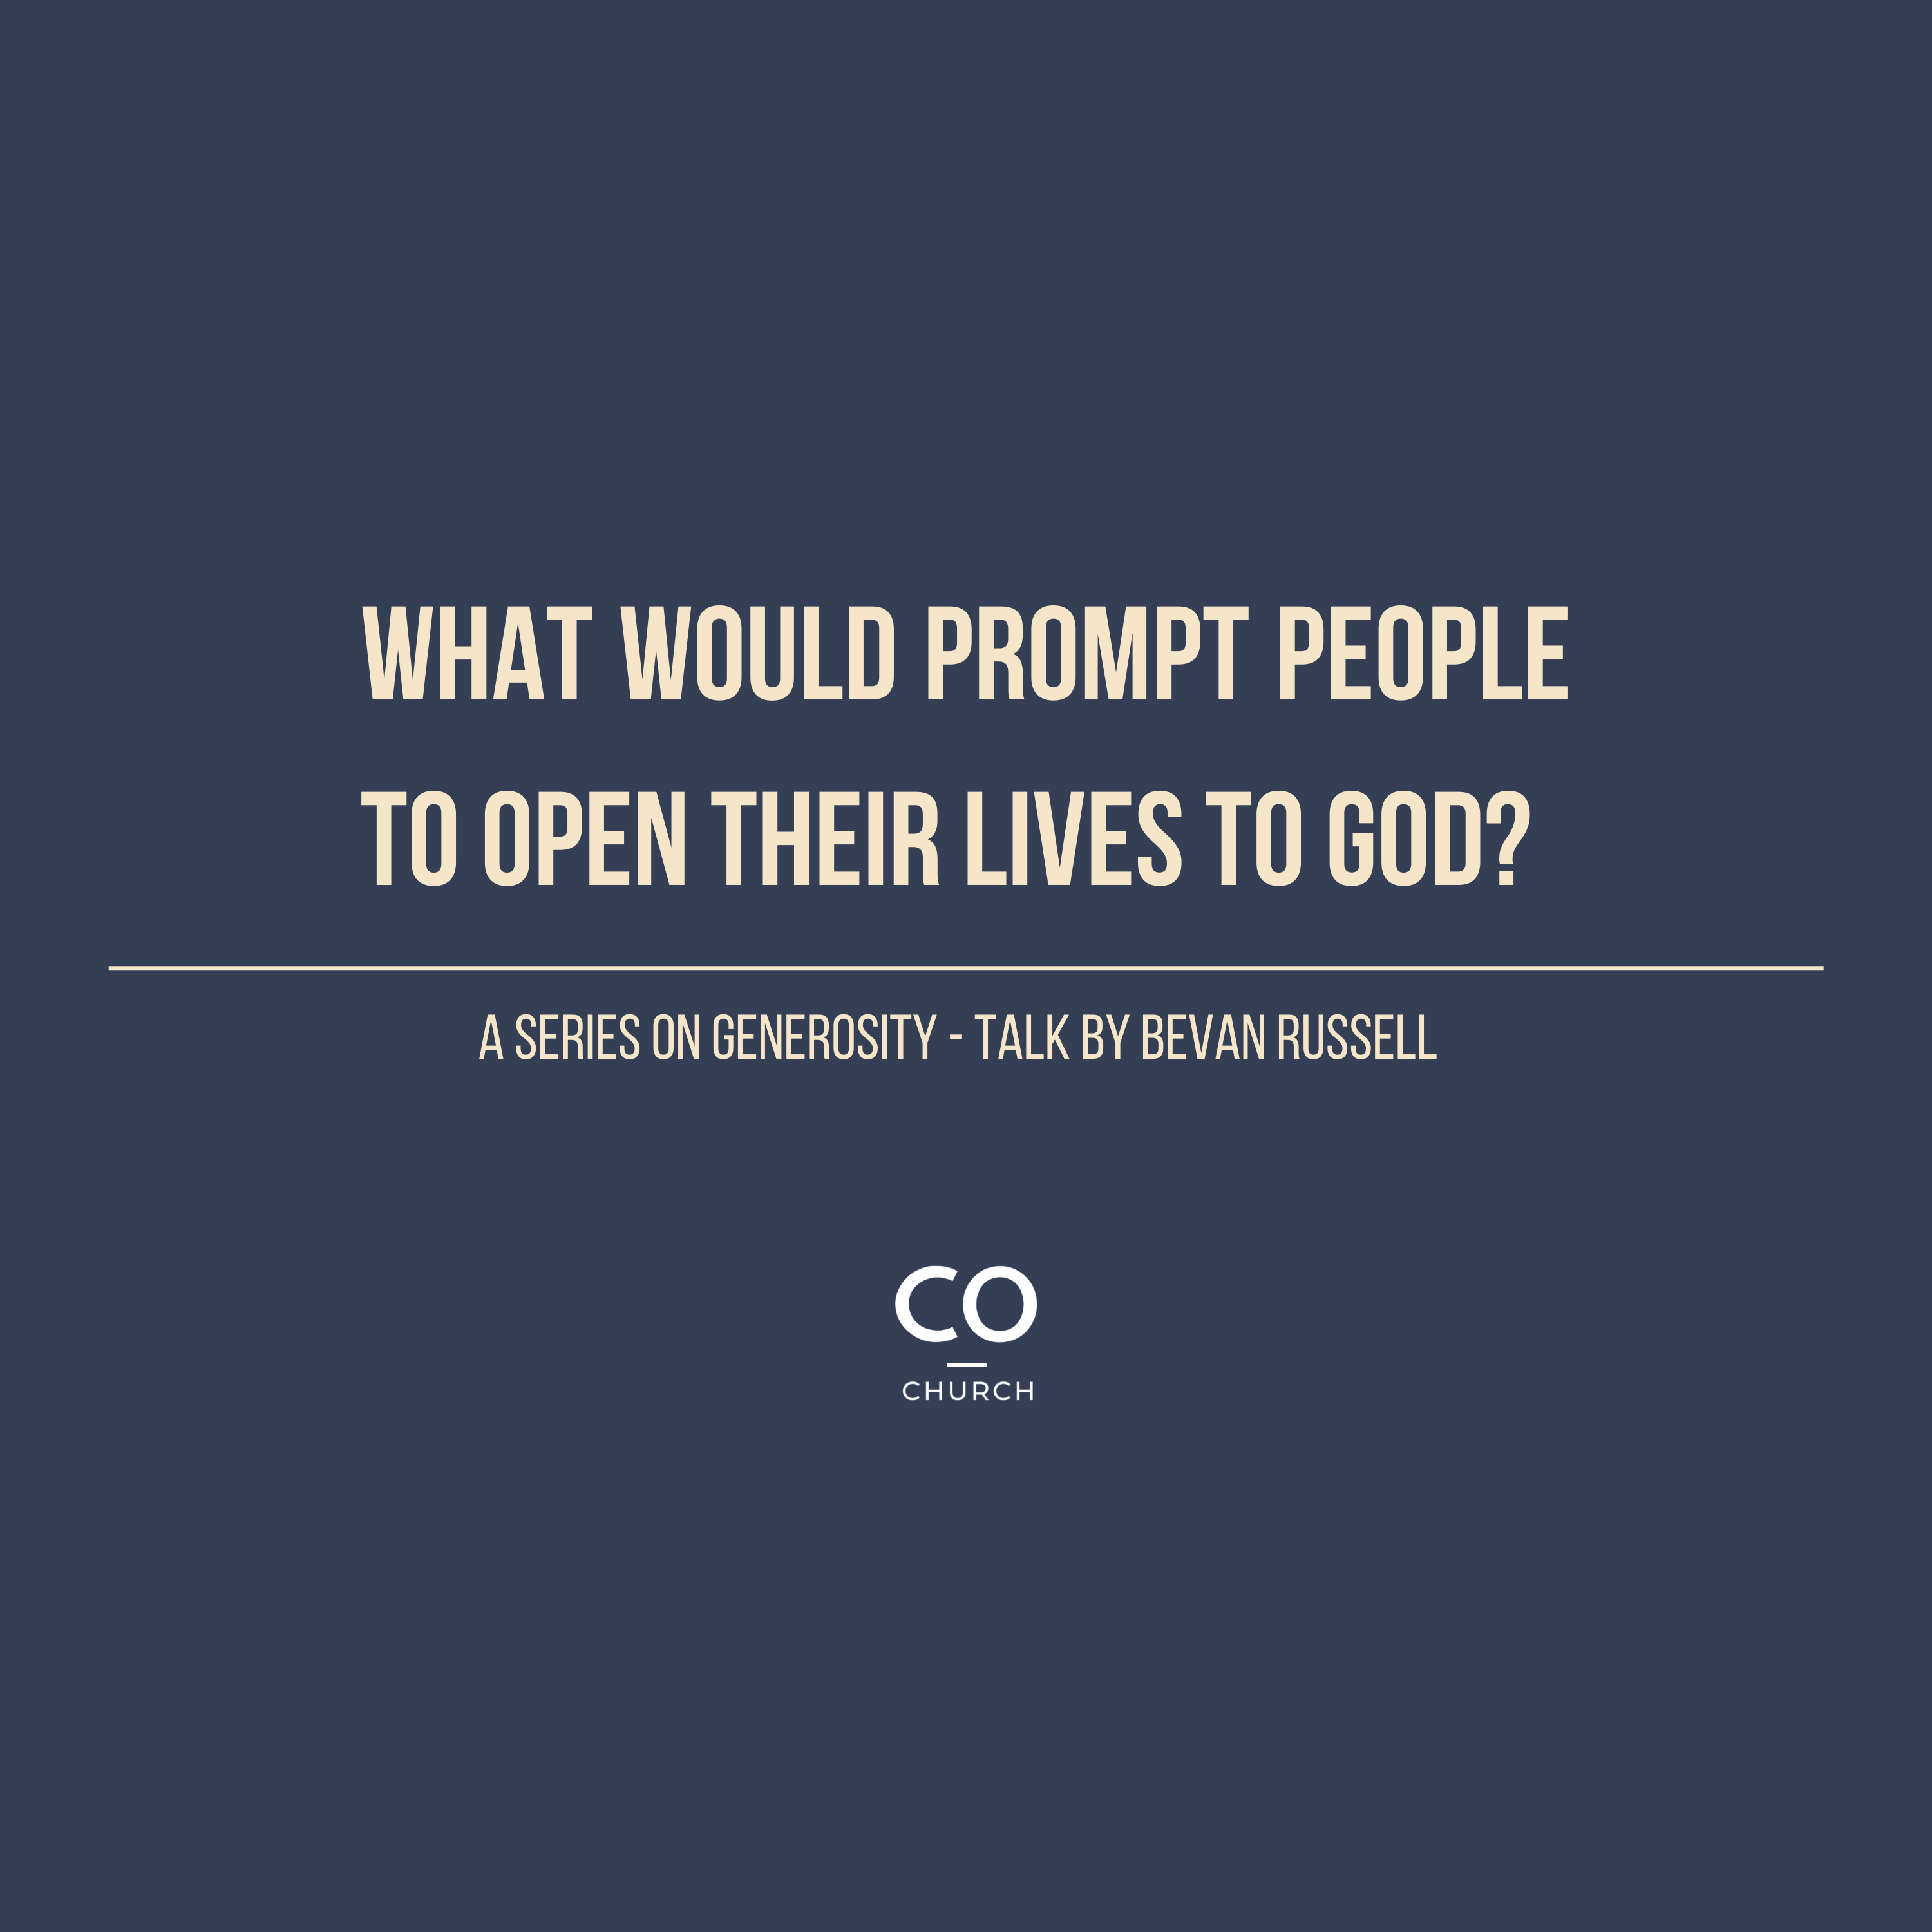 What would prompt people to open their lives to God? A series on generosity by Bevan Russell.